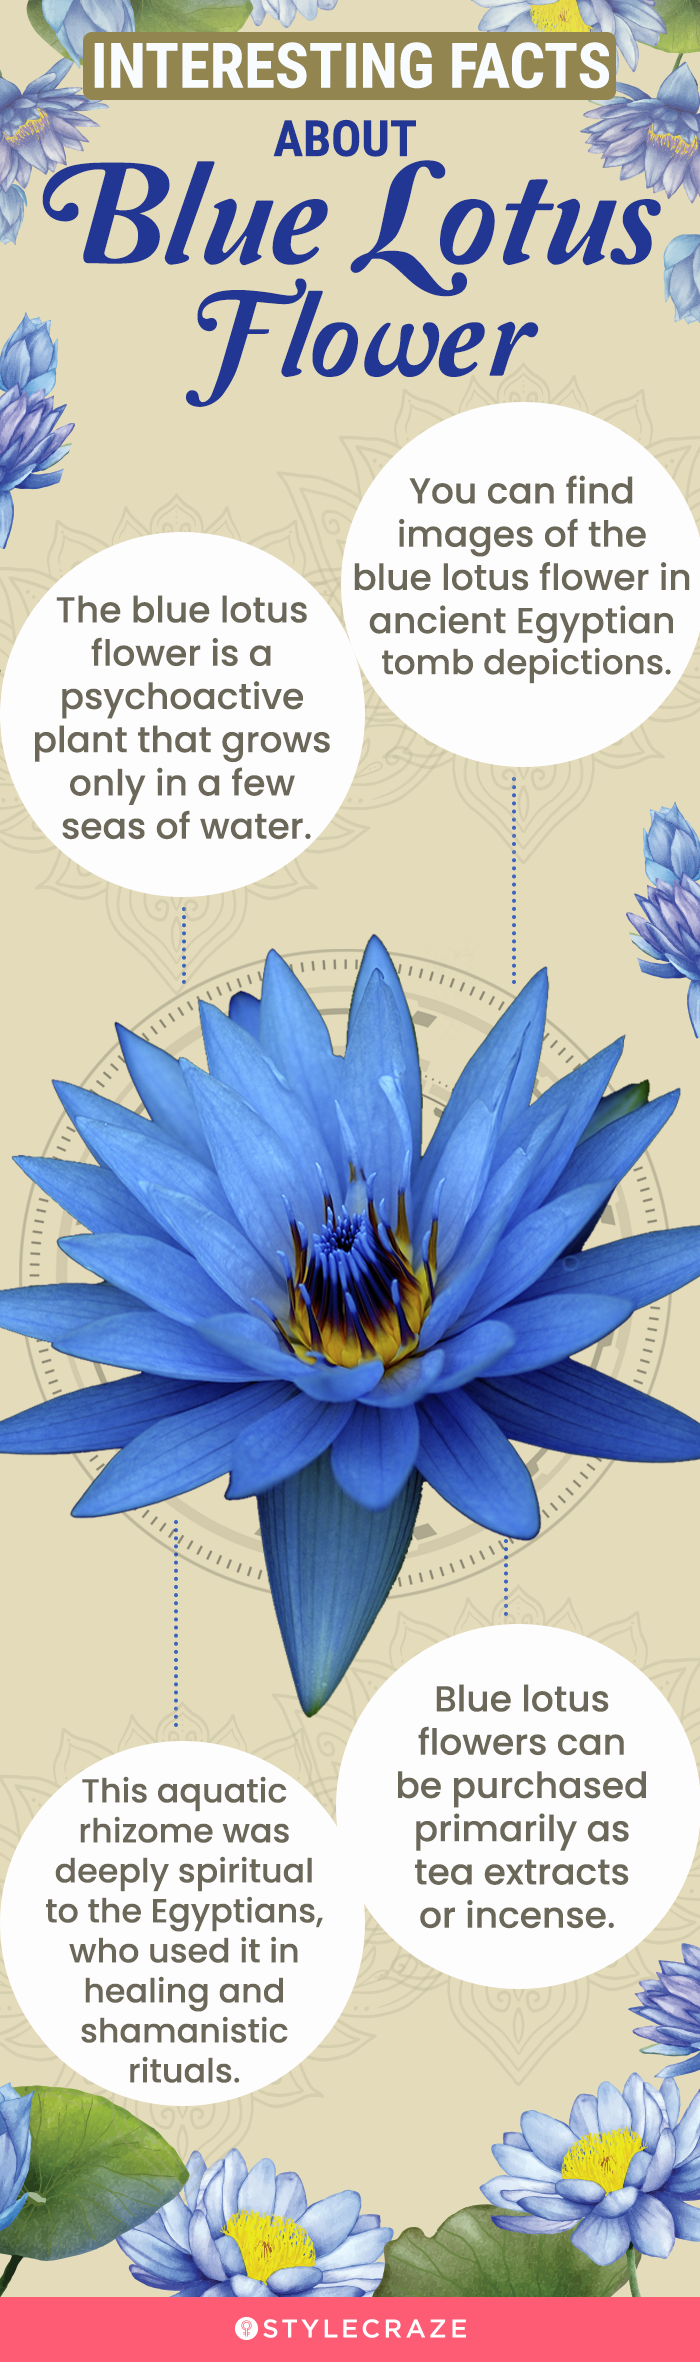 interesting facts about blue lotus [infographic]